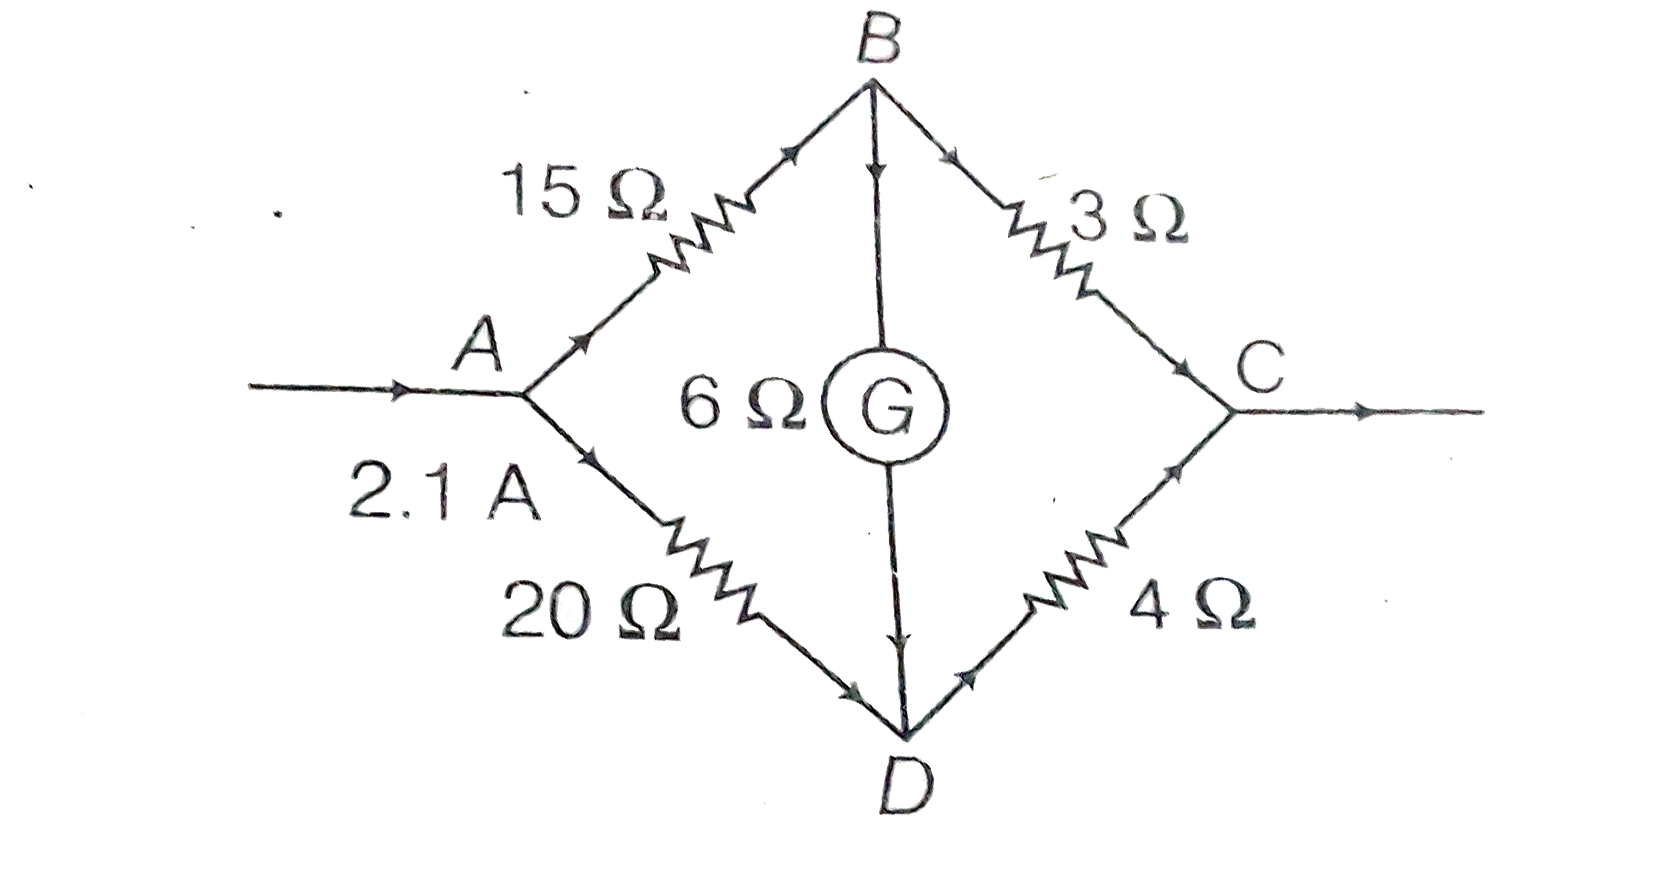 In the following network, the current flowing through 15Omega resistance is